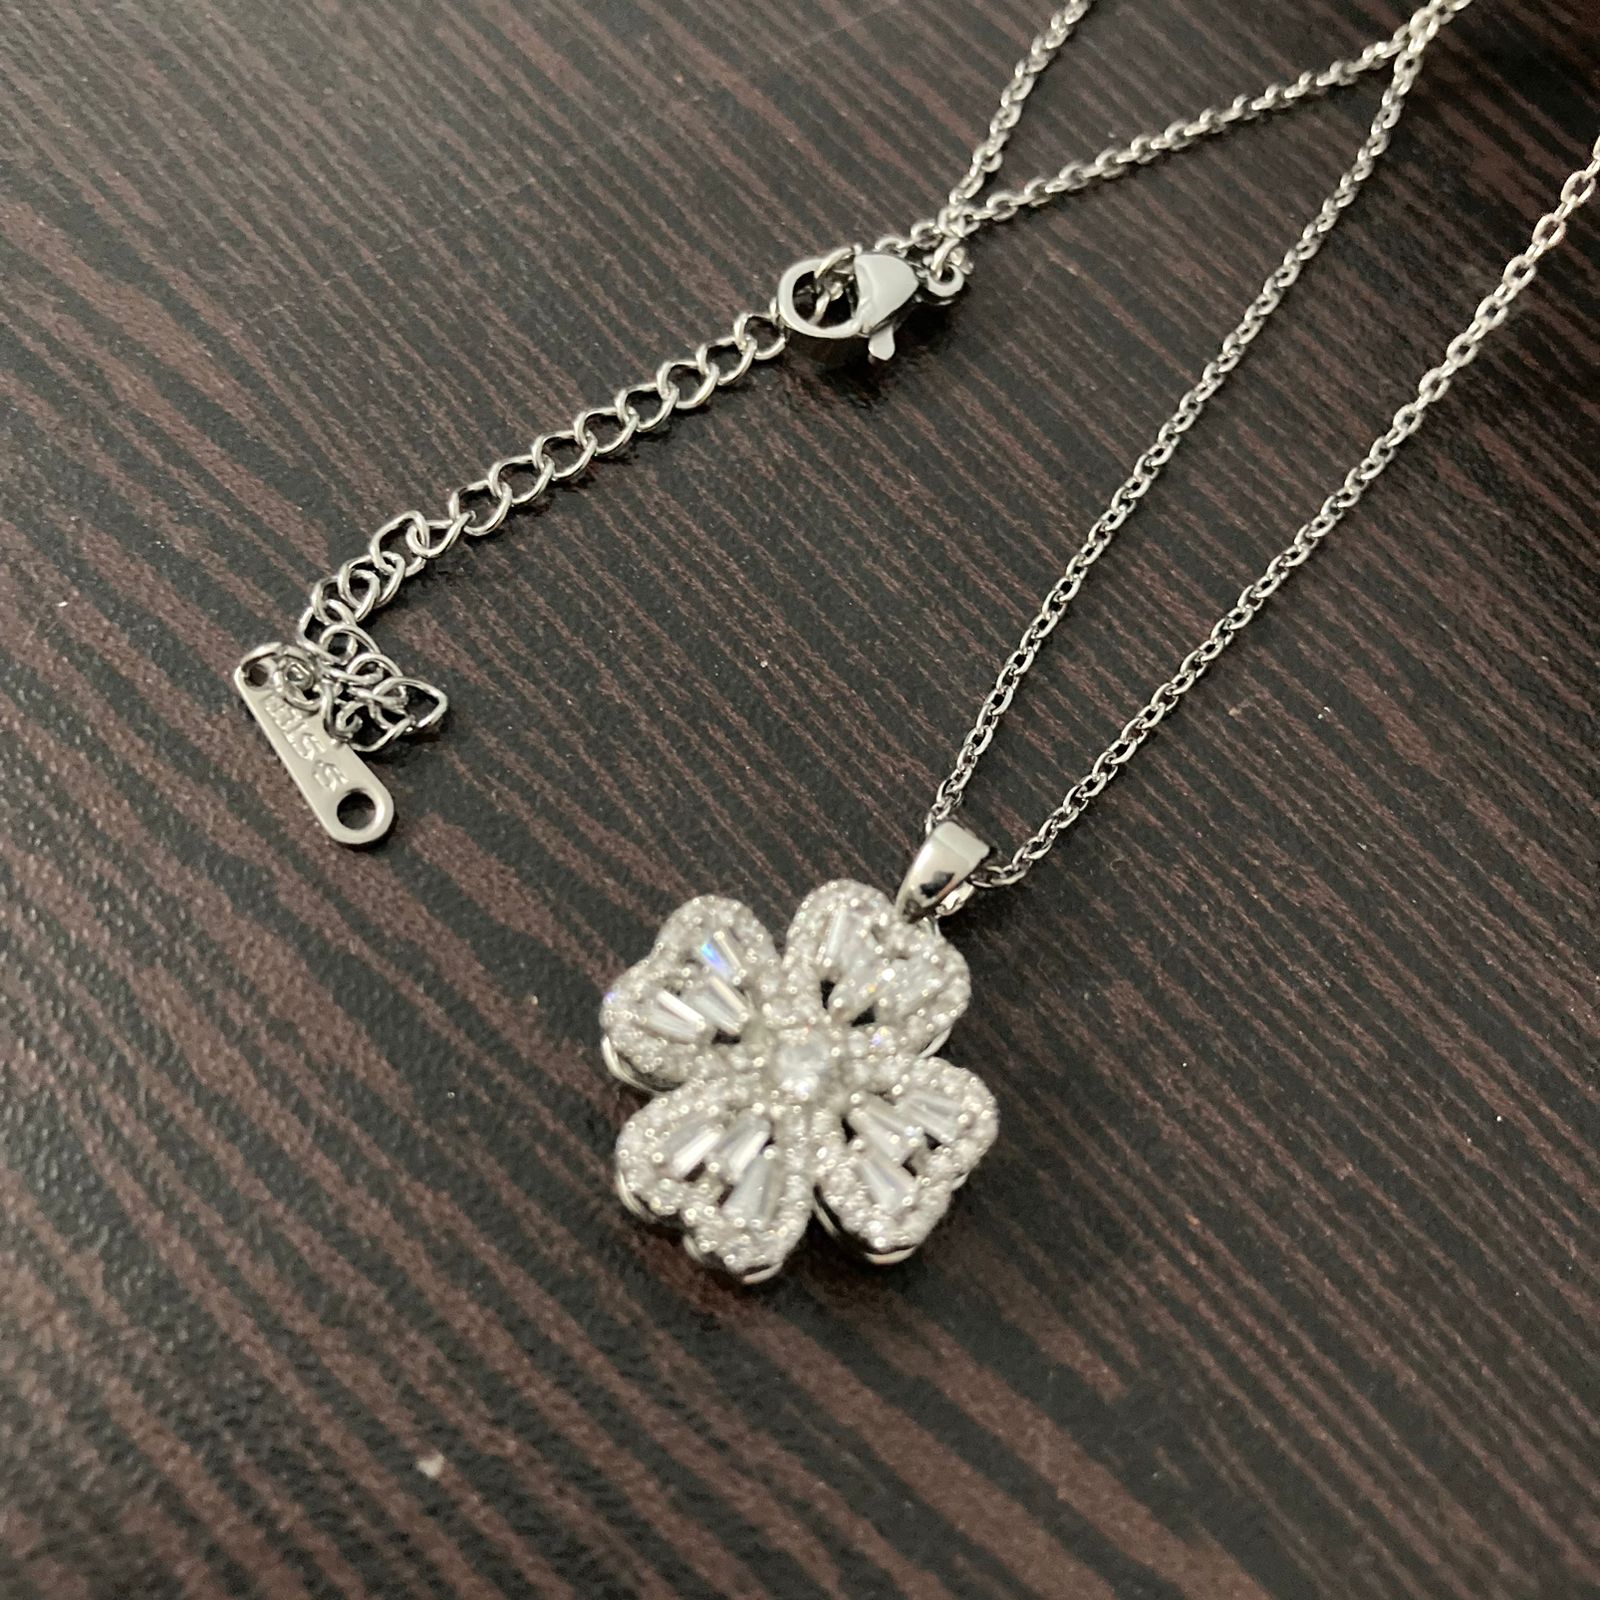 Cute Gift- Minimalist Silver Chain With Spinning Pendant